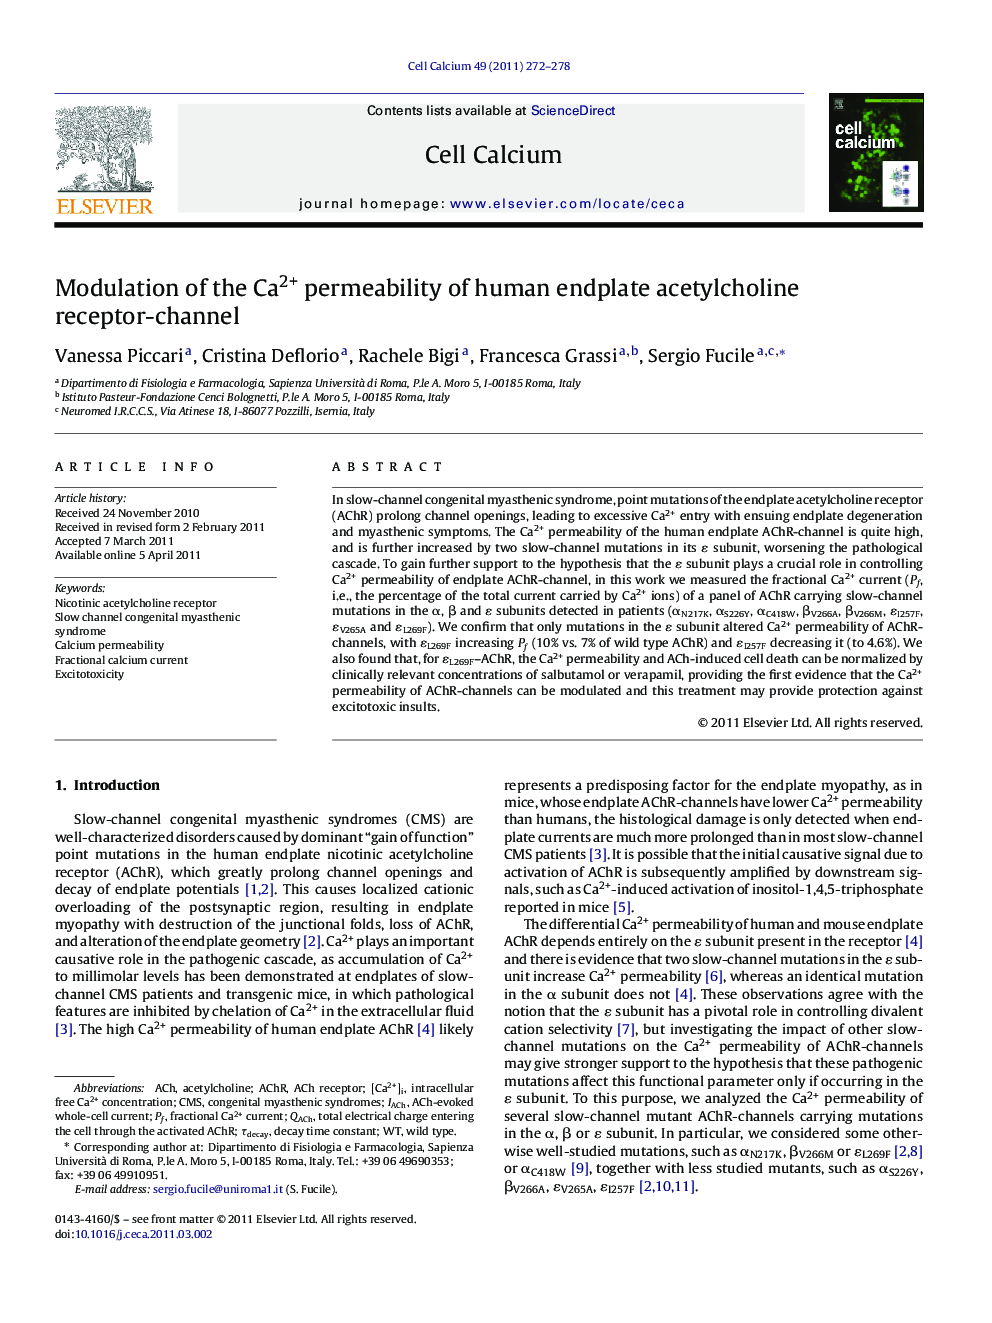 Modulation of the Ca2+ permeability of human endplate acetylcholine receptor-channel